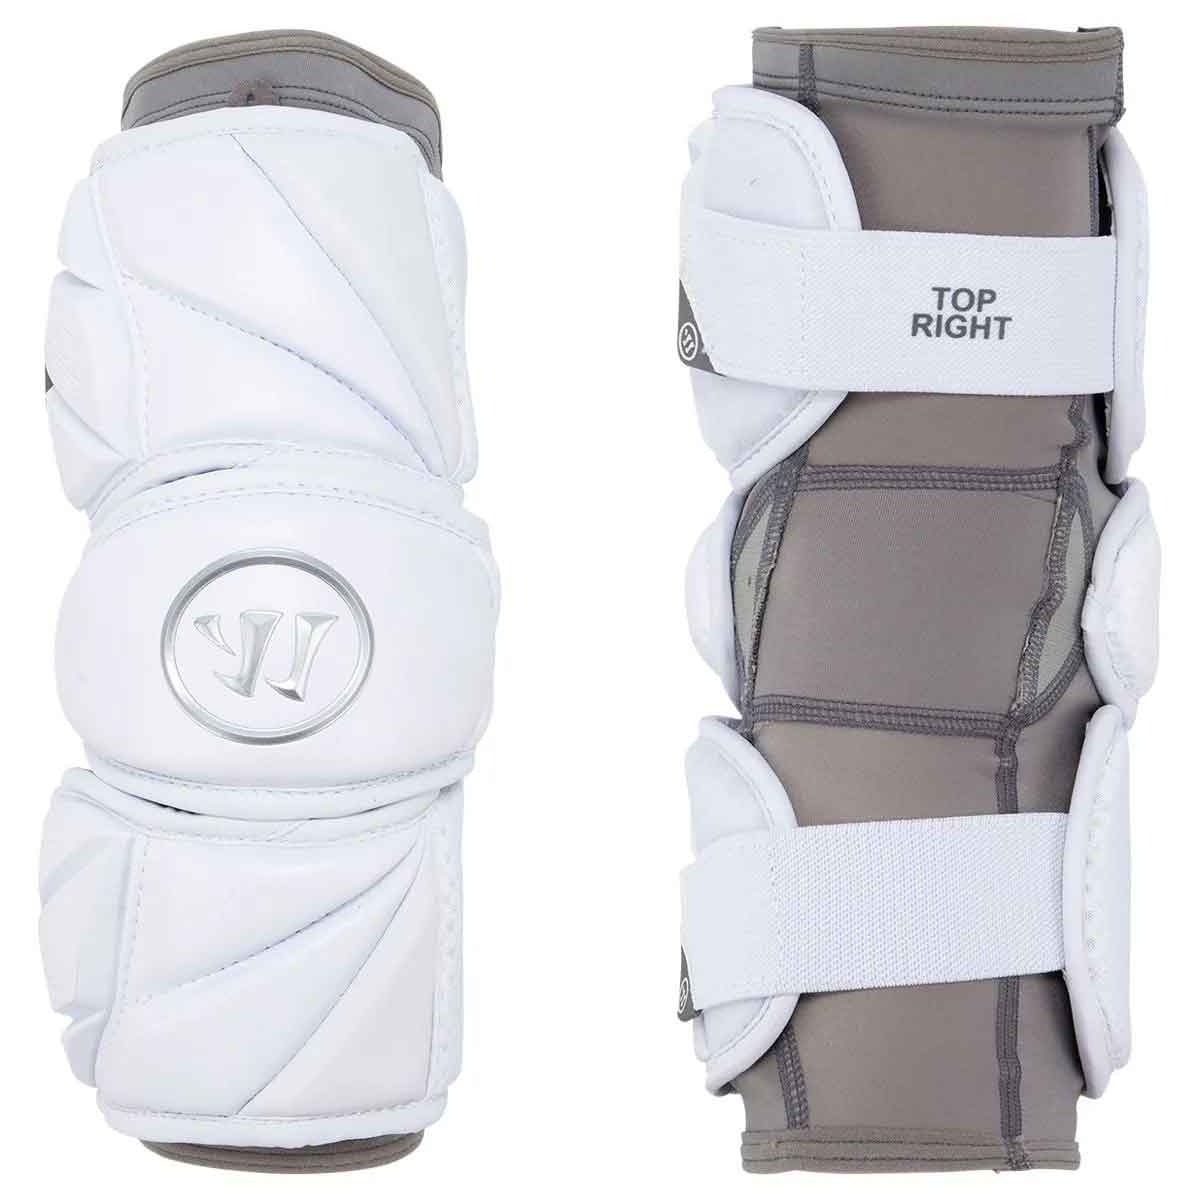 Full picture of the Warrior Evo Pro Lacrosse Arm Pads (2019)